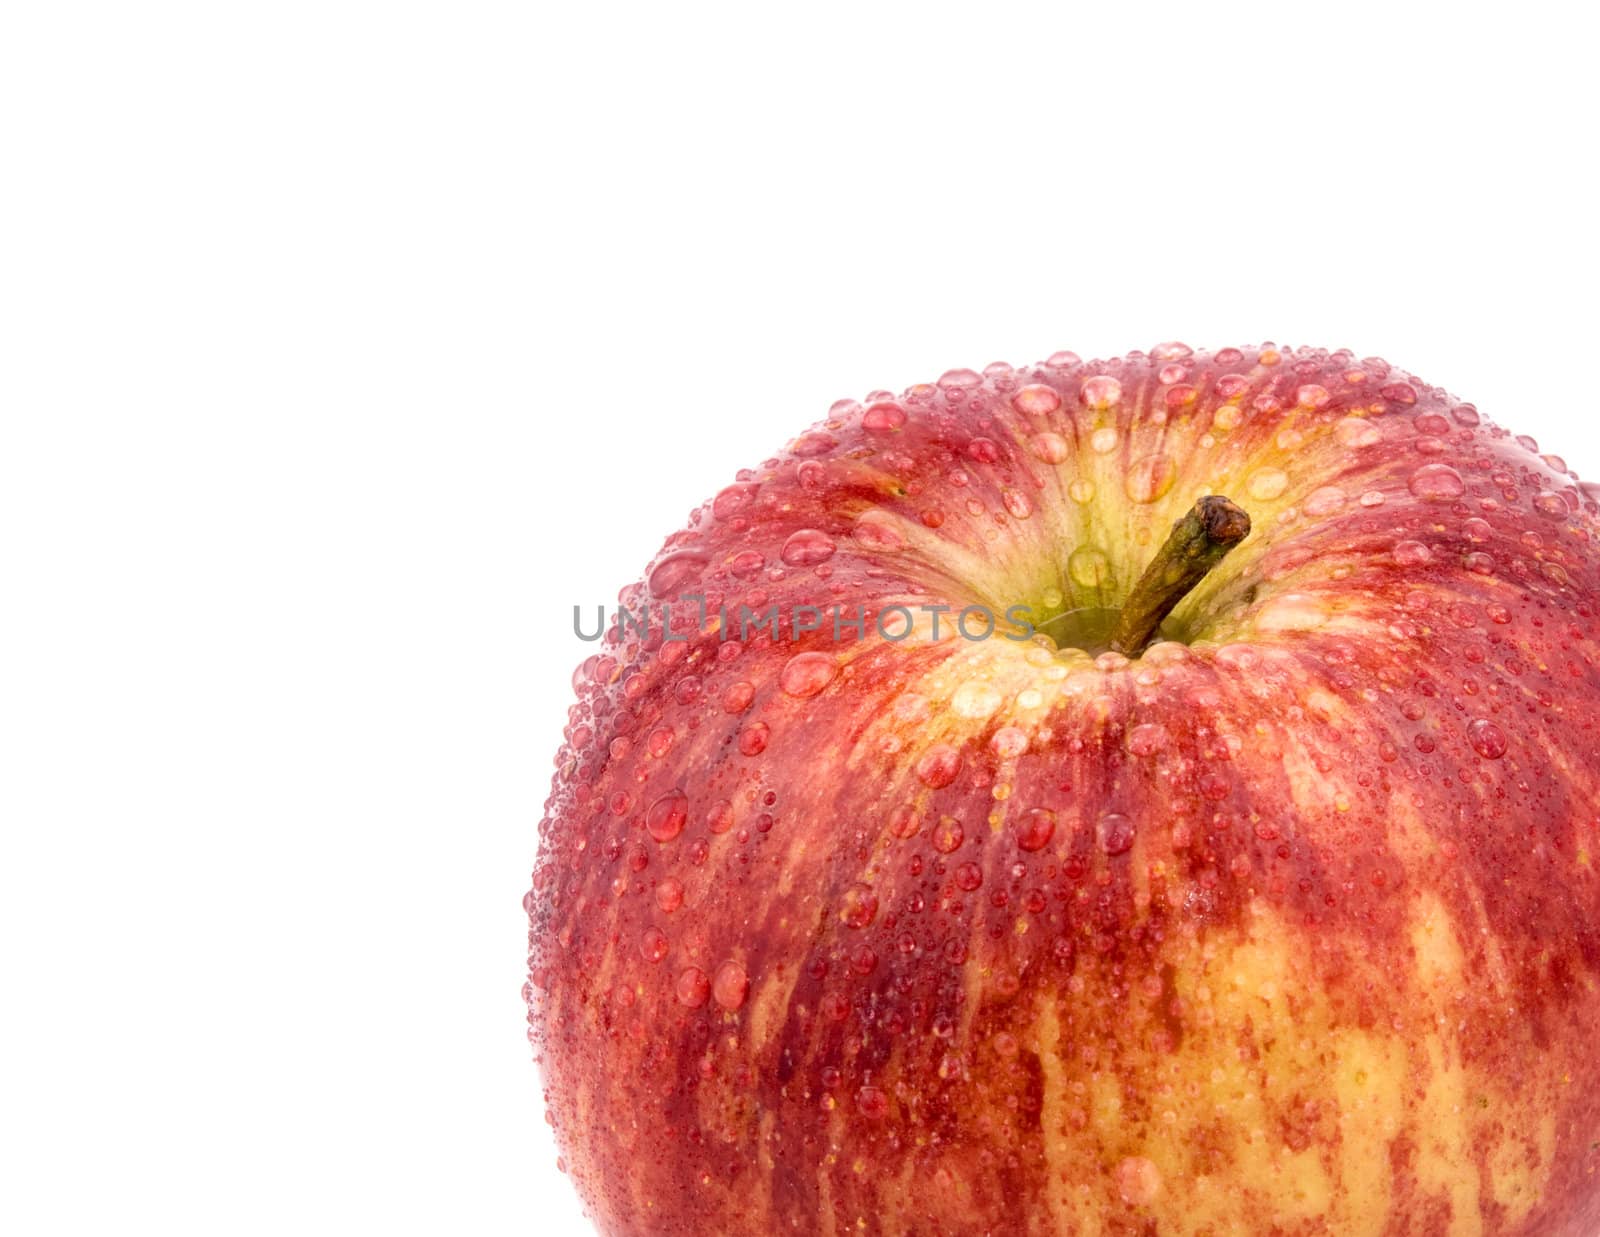 Closeup picture of tasty red aplle on white background